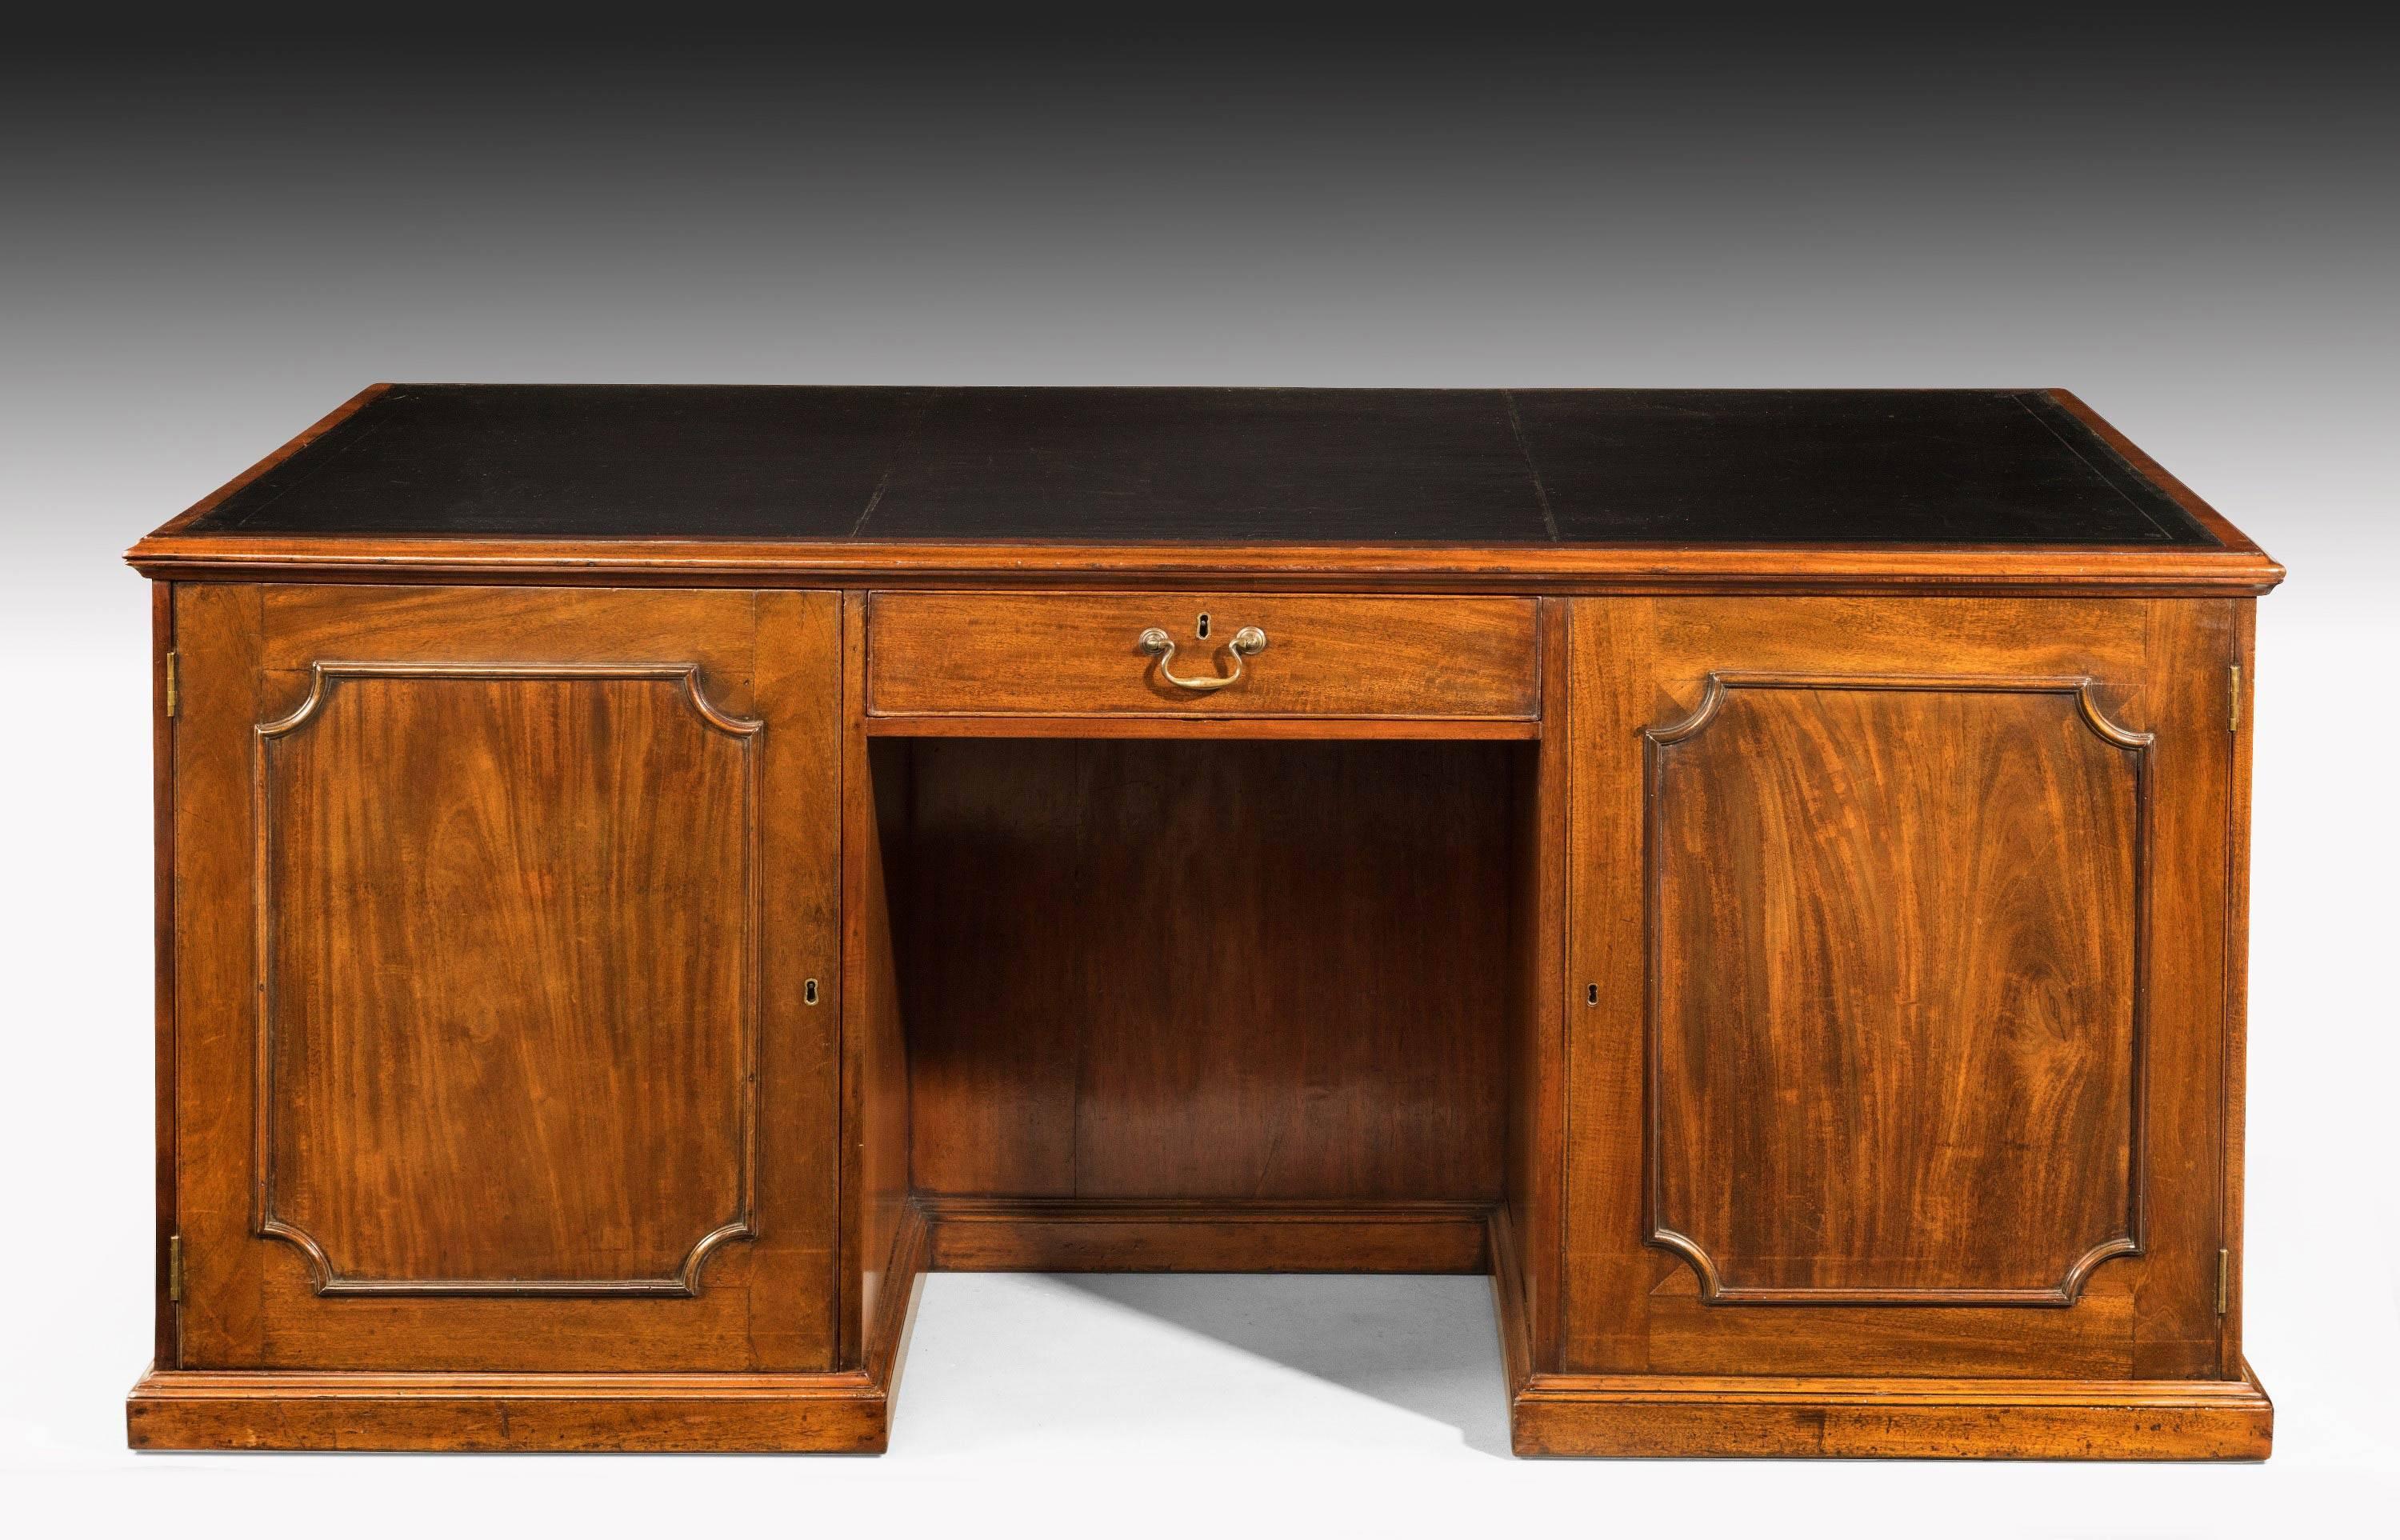 Chippendale Period Mahogany Desk of Unusual Form with Blind Drawers 2